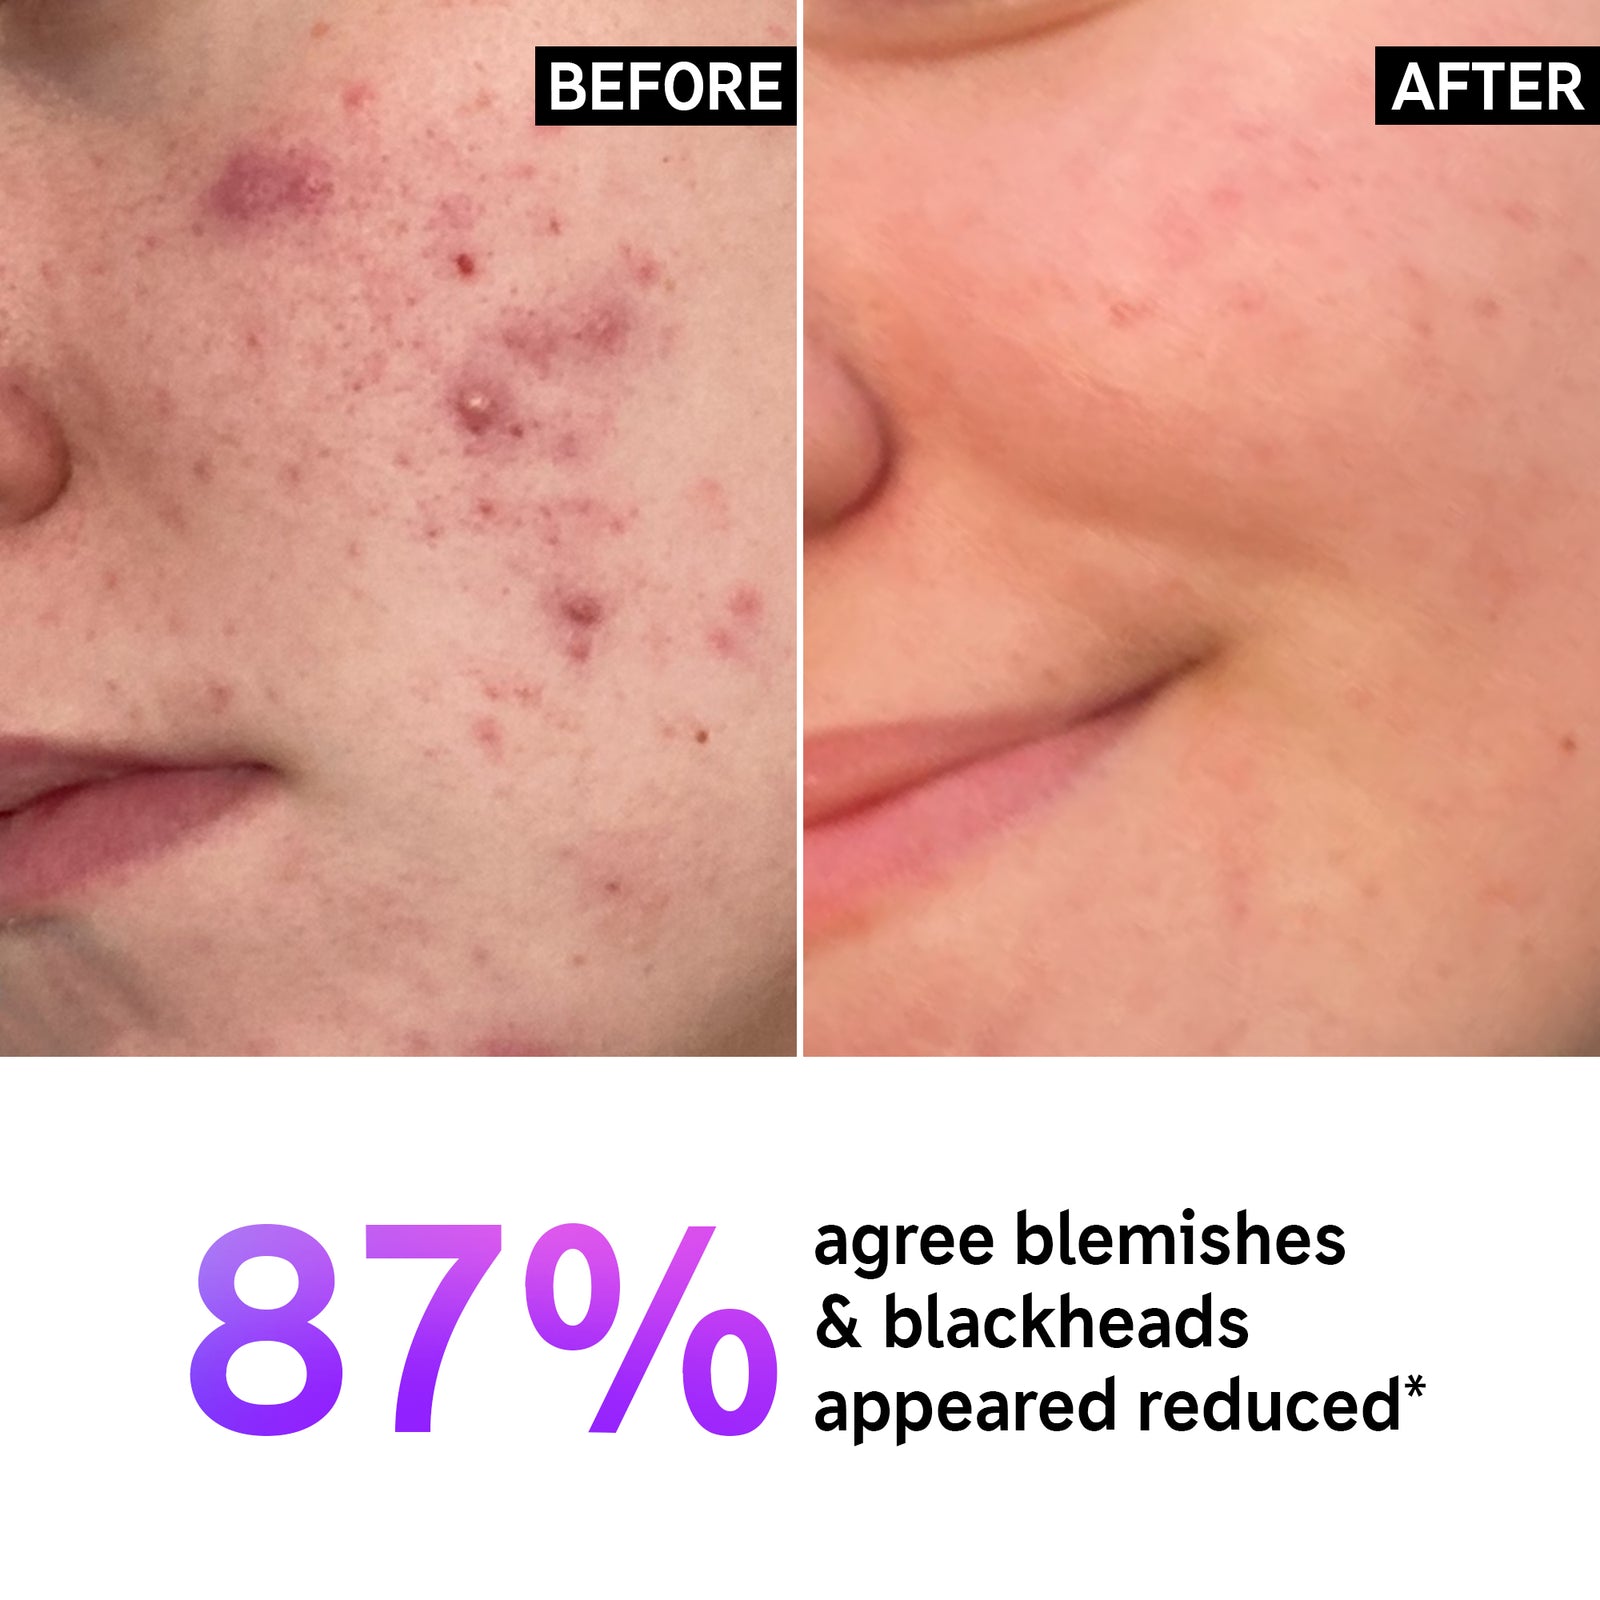 Before and After image of using Supersize Salicylic Acid Cleanser, with the statistic 